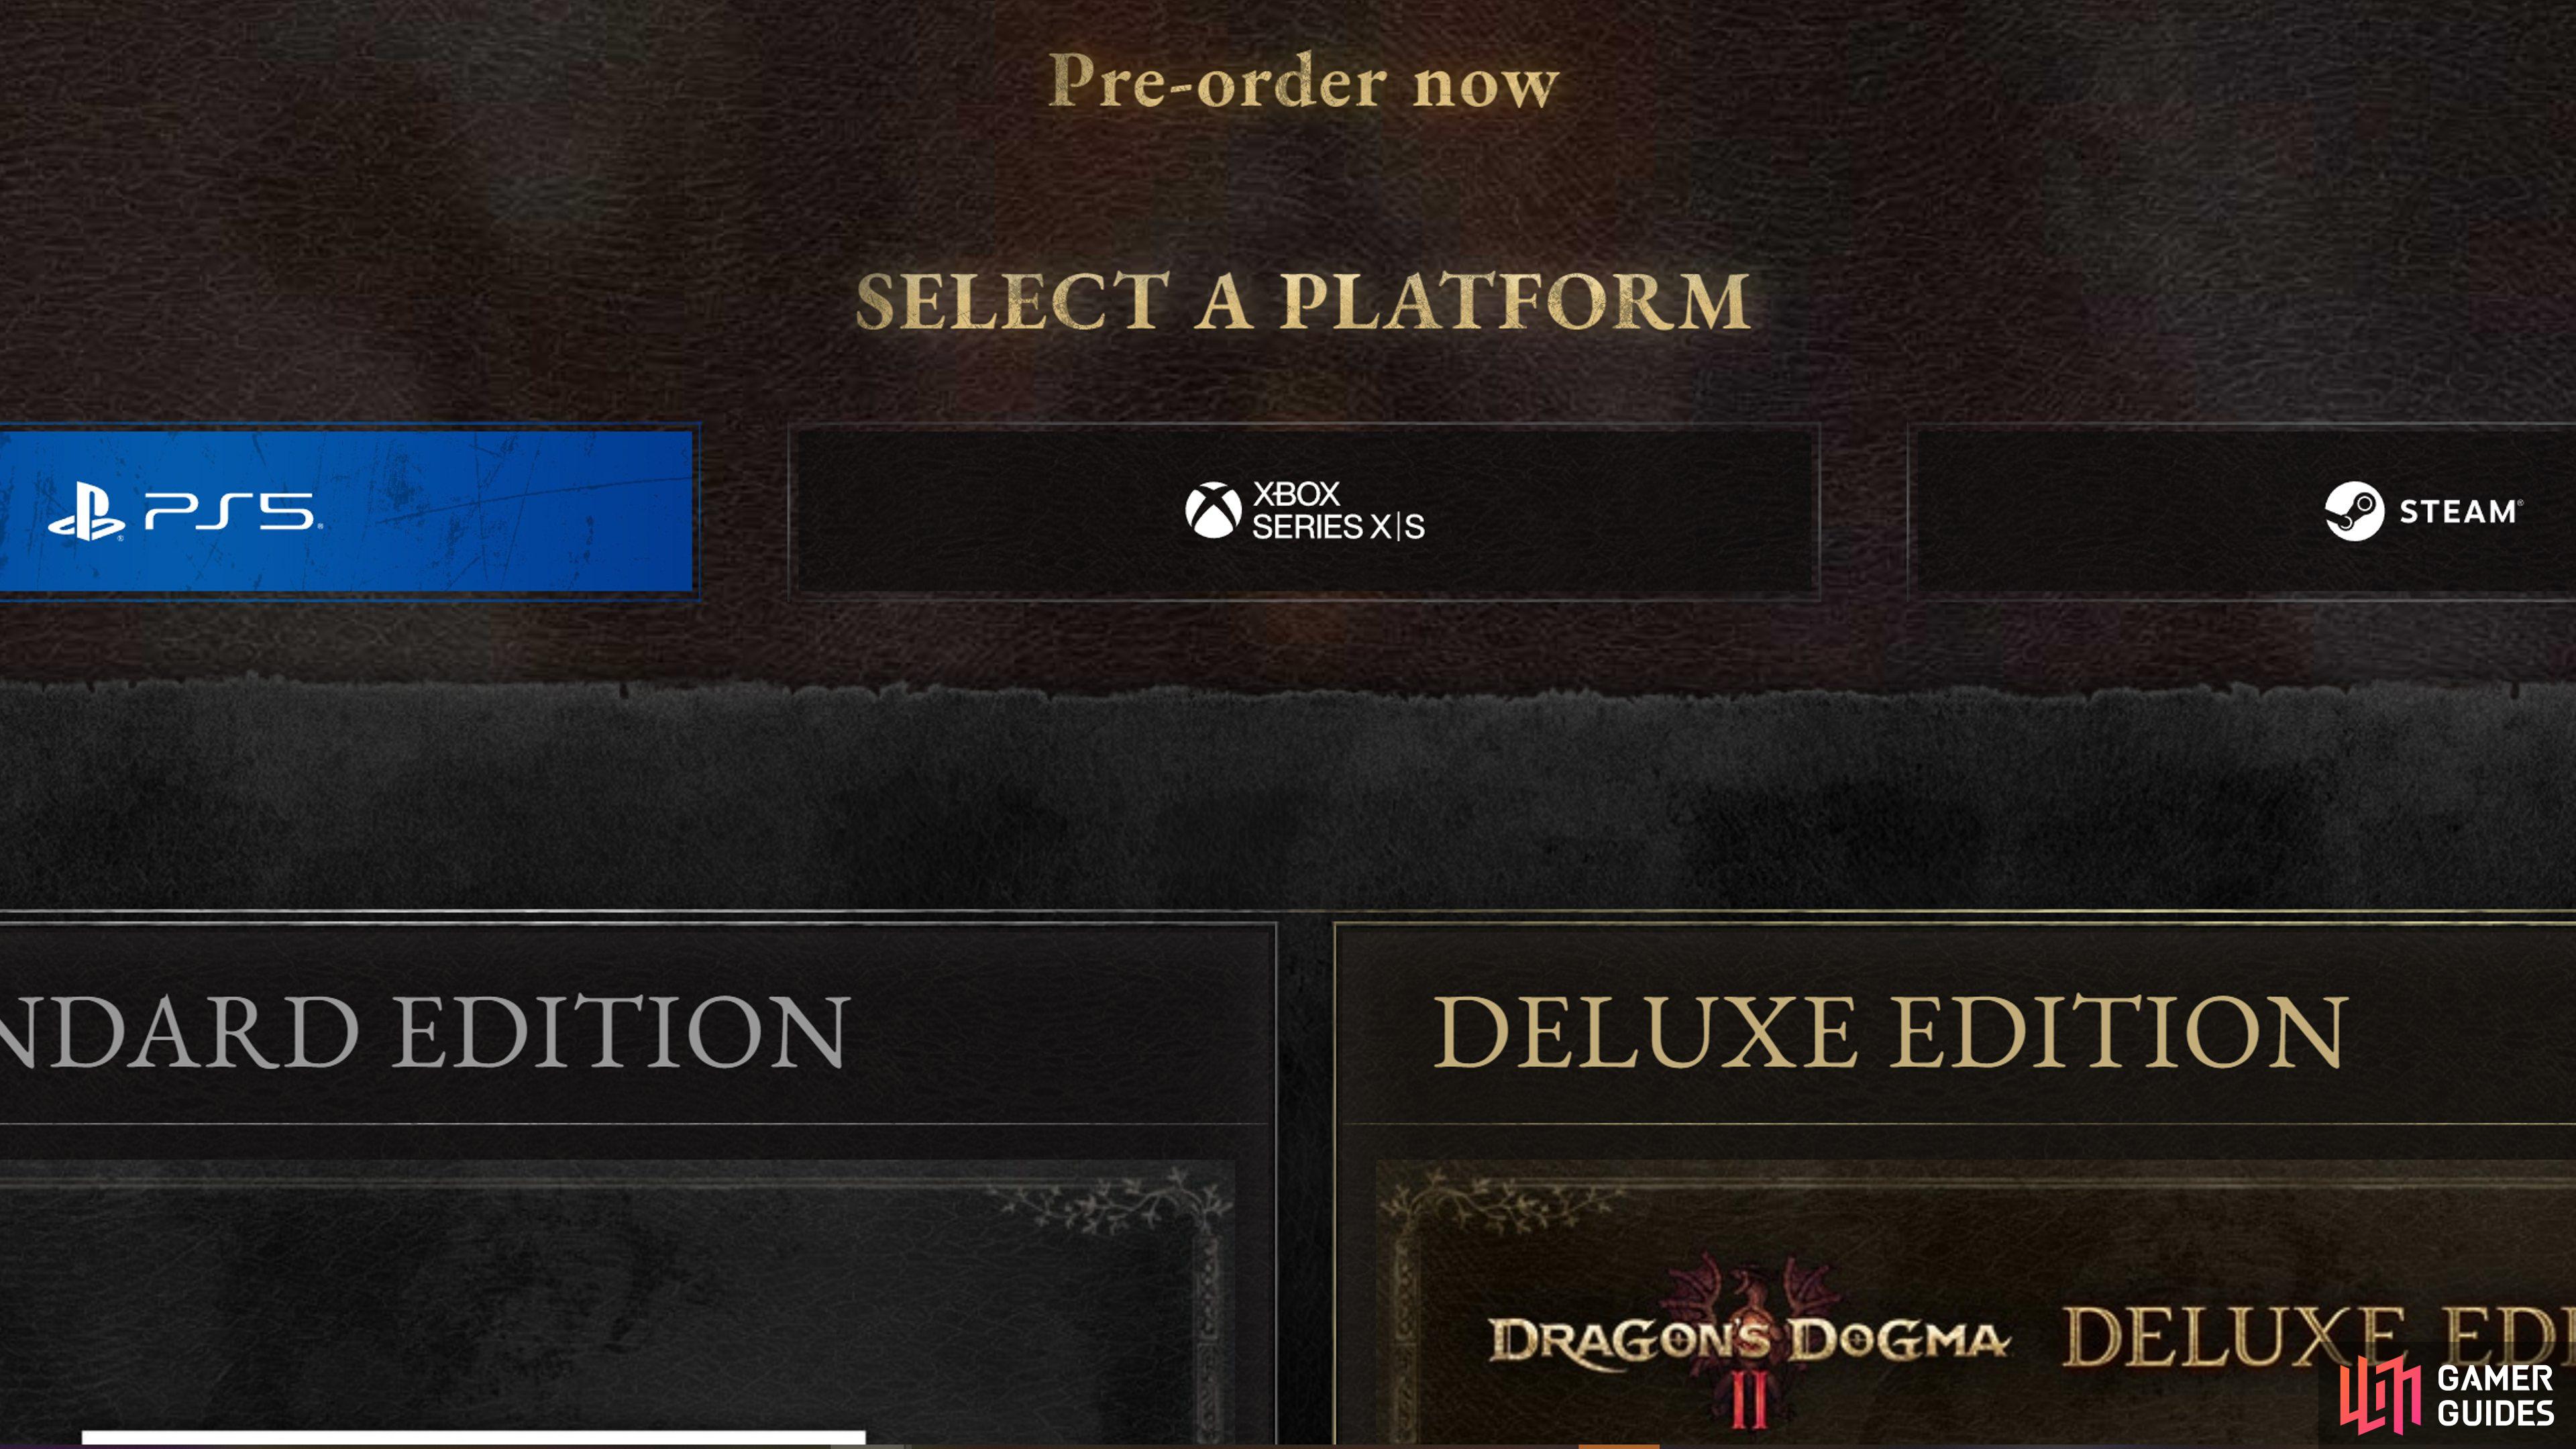 You’ll need to get your hands on a current-gen console if you want to play Dragon’s Dogma 2.